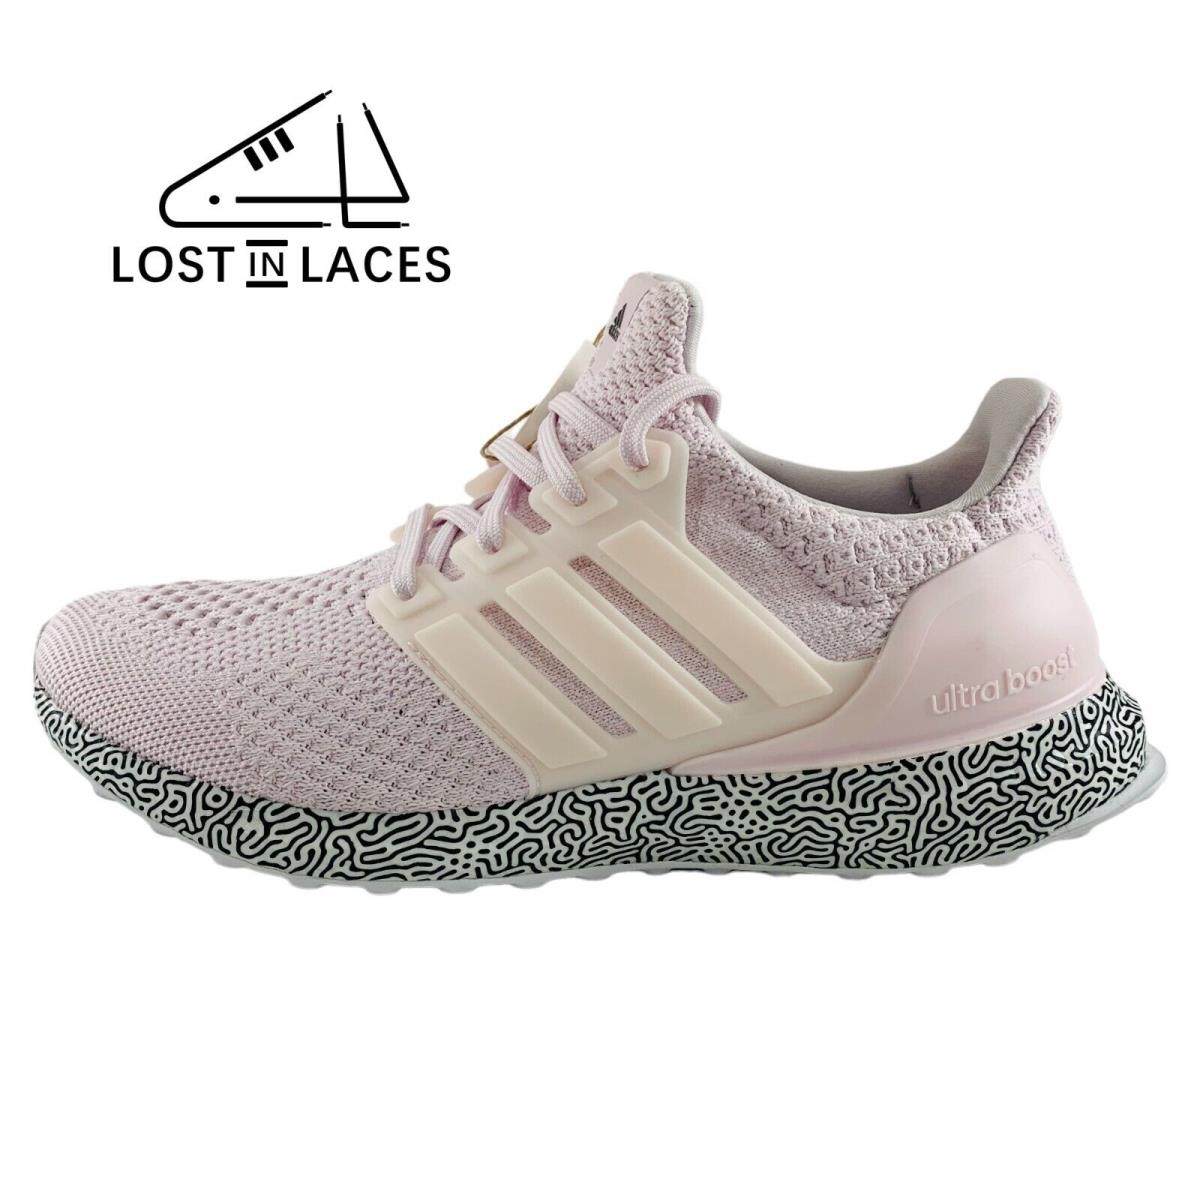 Adidas Ultraboost Dna Pink Sneakers Running Shoes GV8720 Women`s Sizes